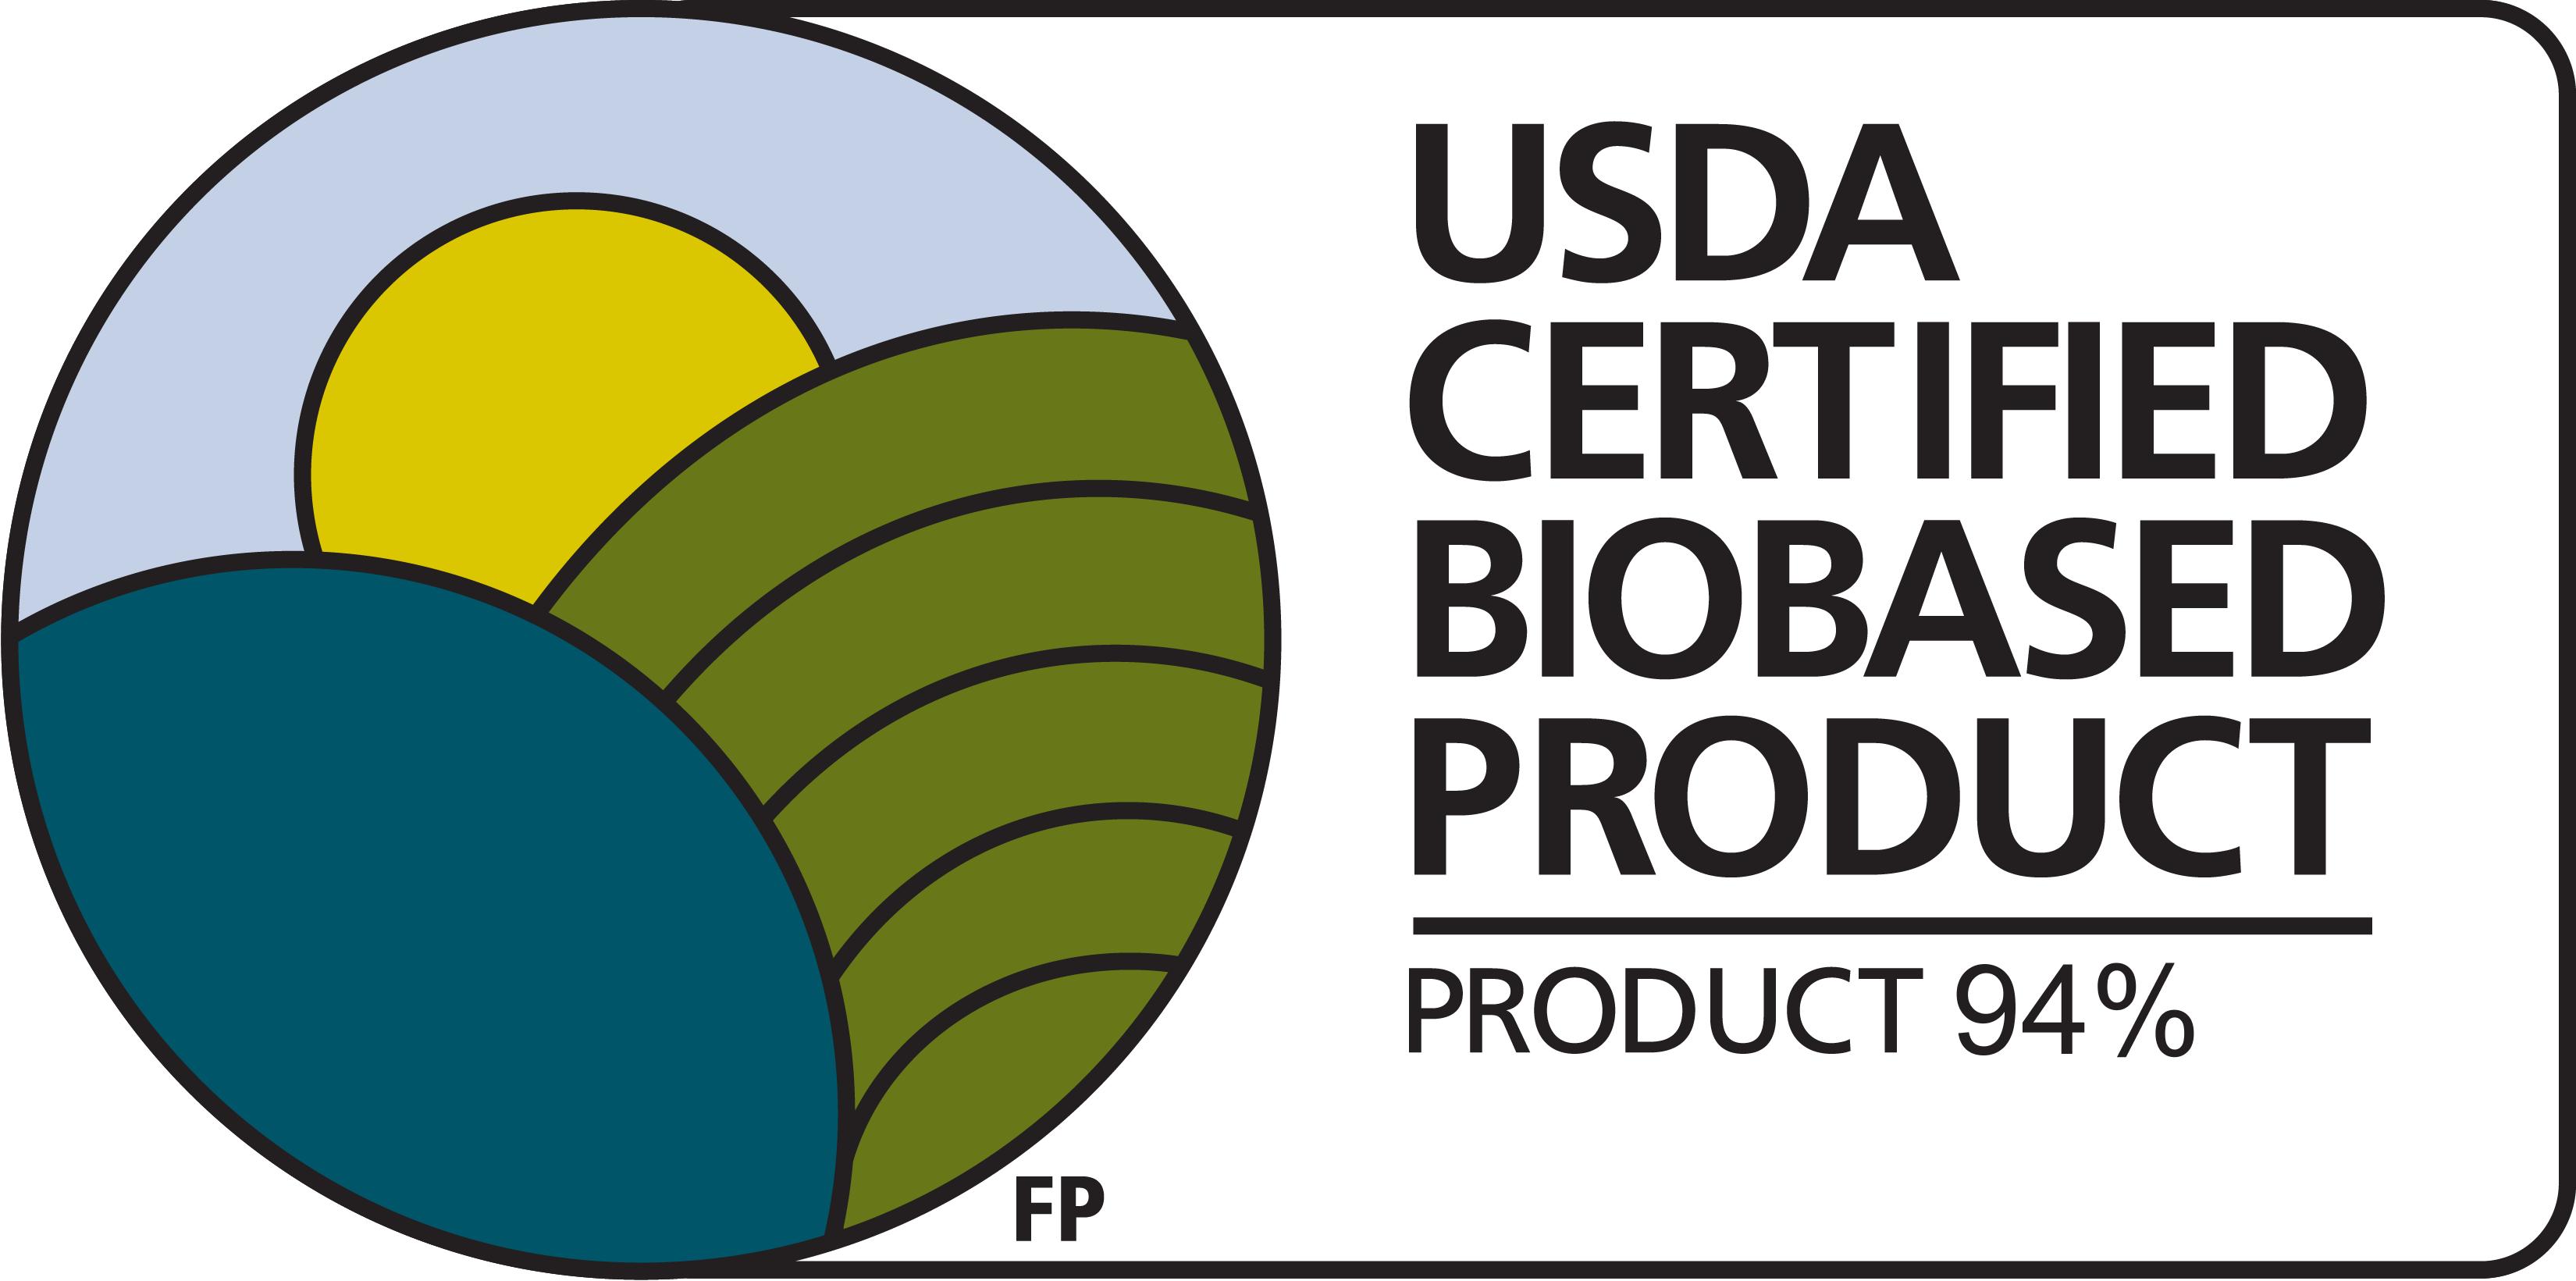 The label is estimated to be on certified products and available for consumers by May 12, 2014.